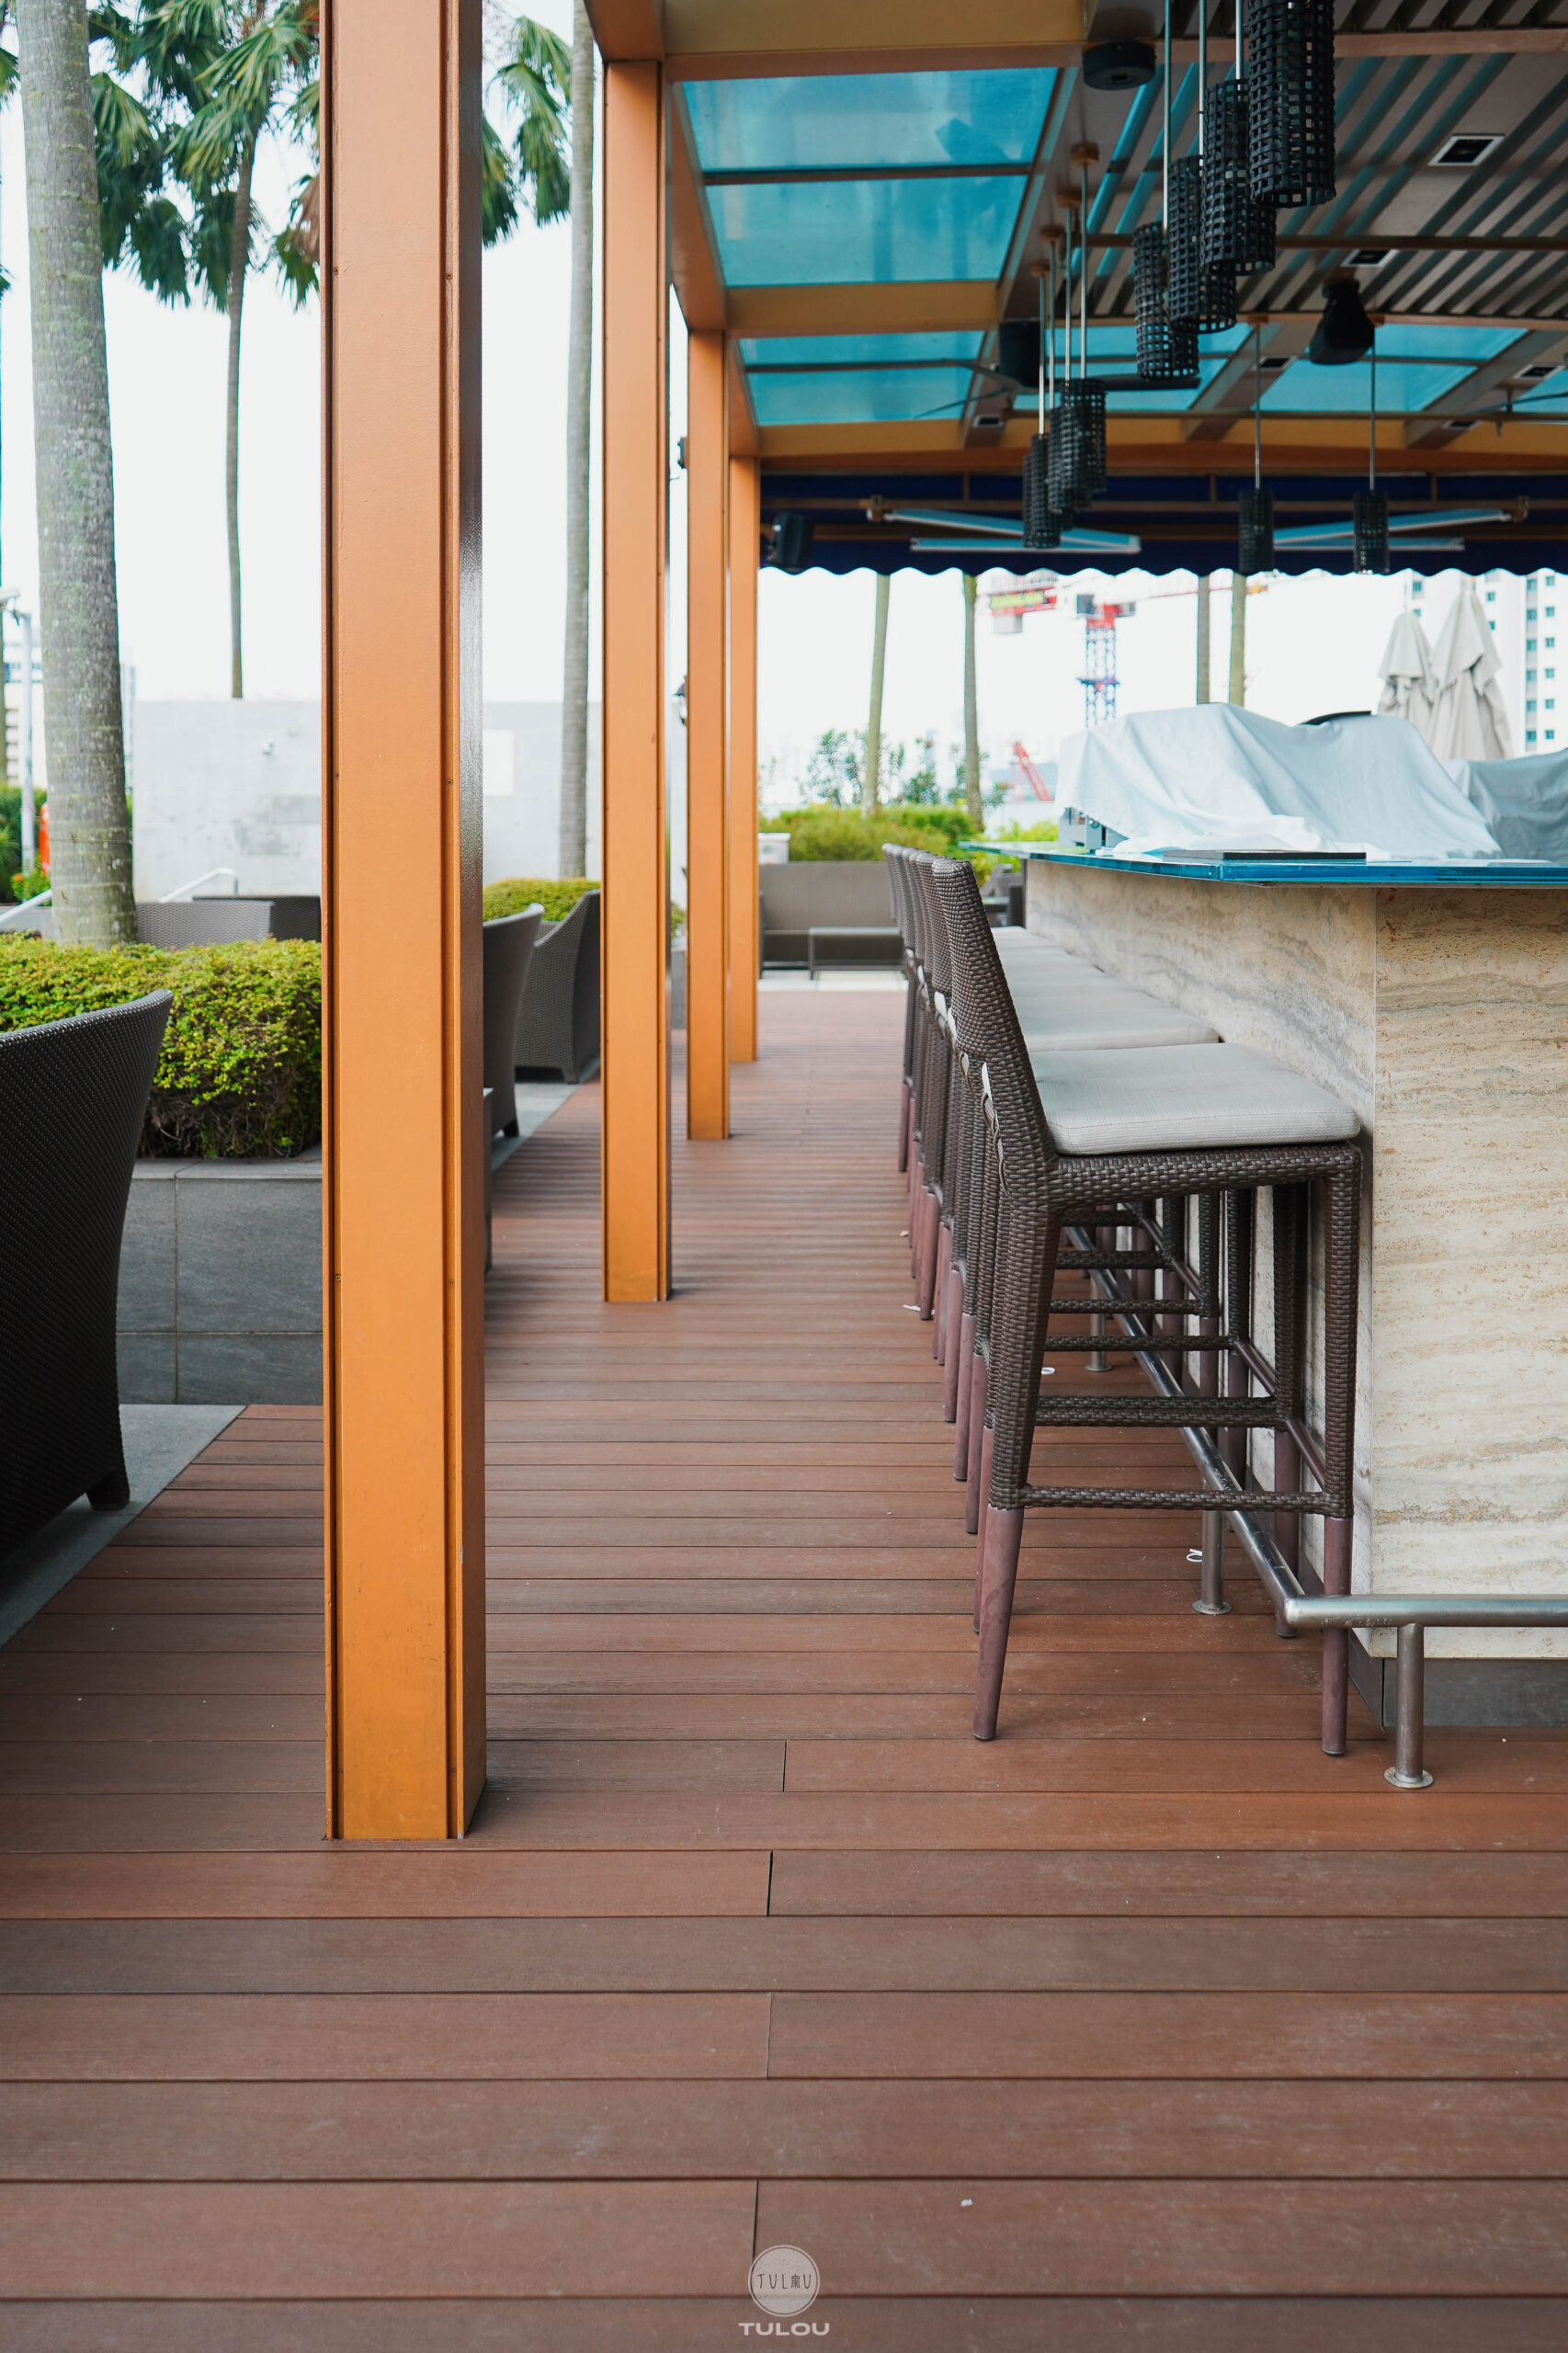 One Farrer Hotel Tulou Composite Timber Decking Singapore 3 scaled - One Farrer Hotel